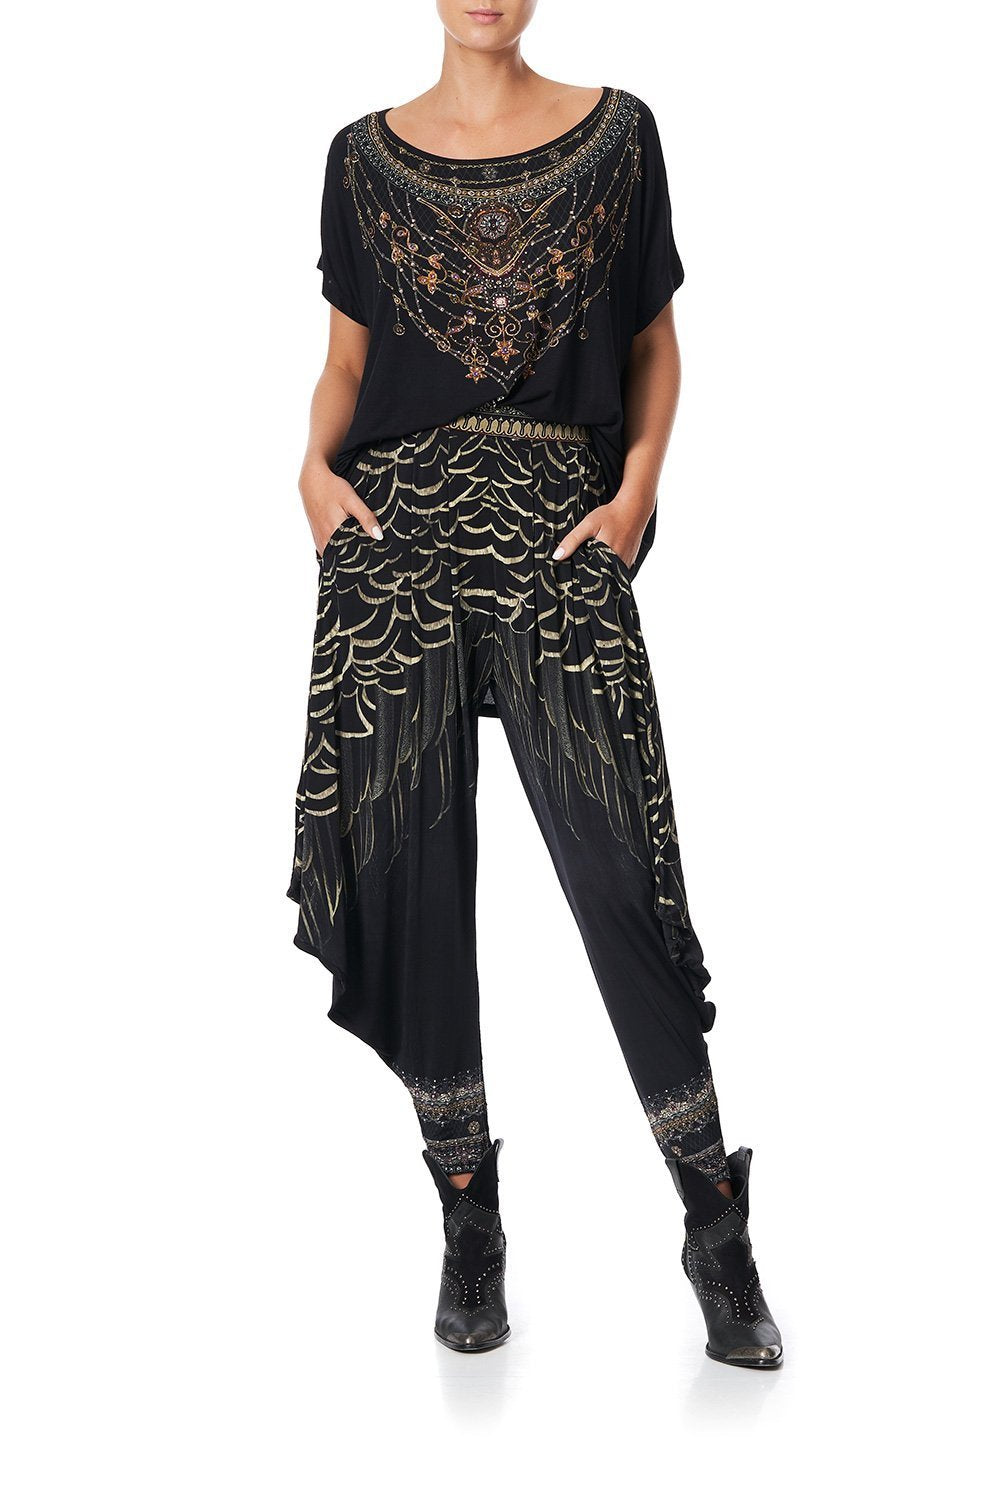 JERSEY DRAPE PANT WITH POCKET UNDER A FULL MOON